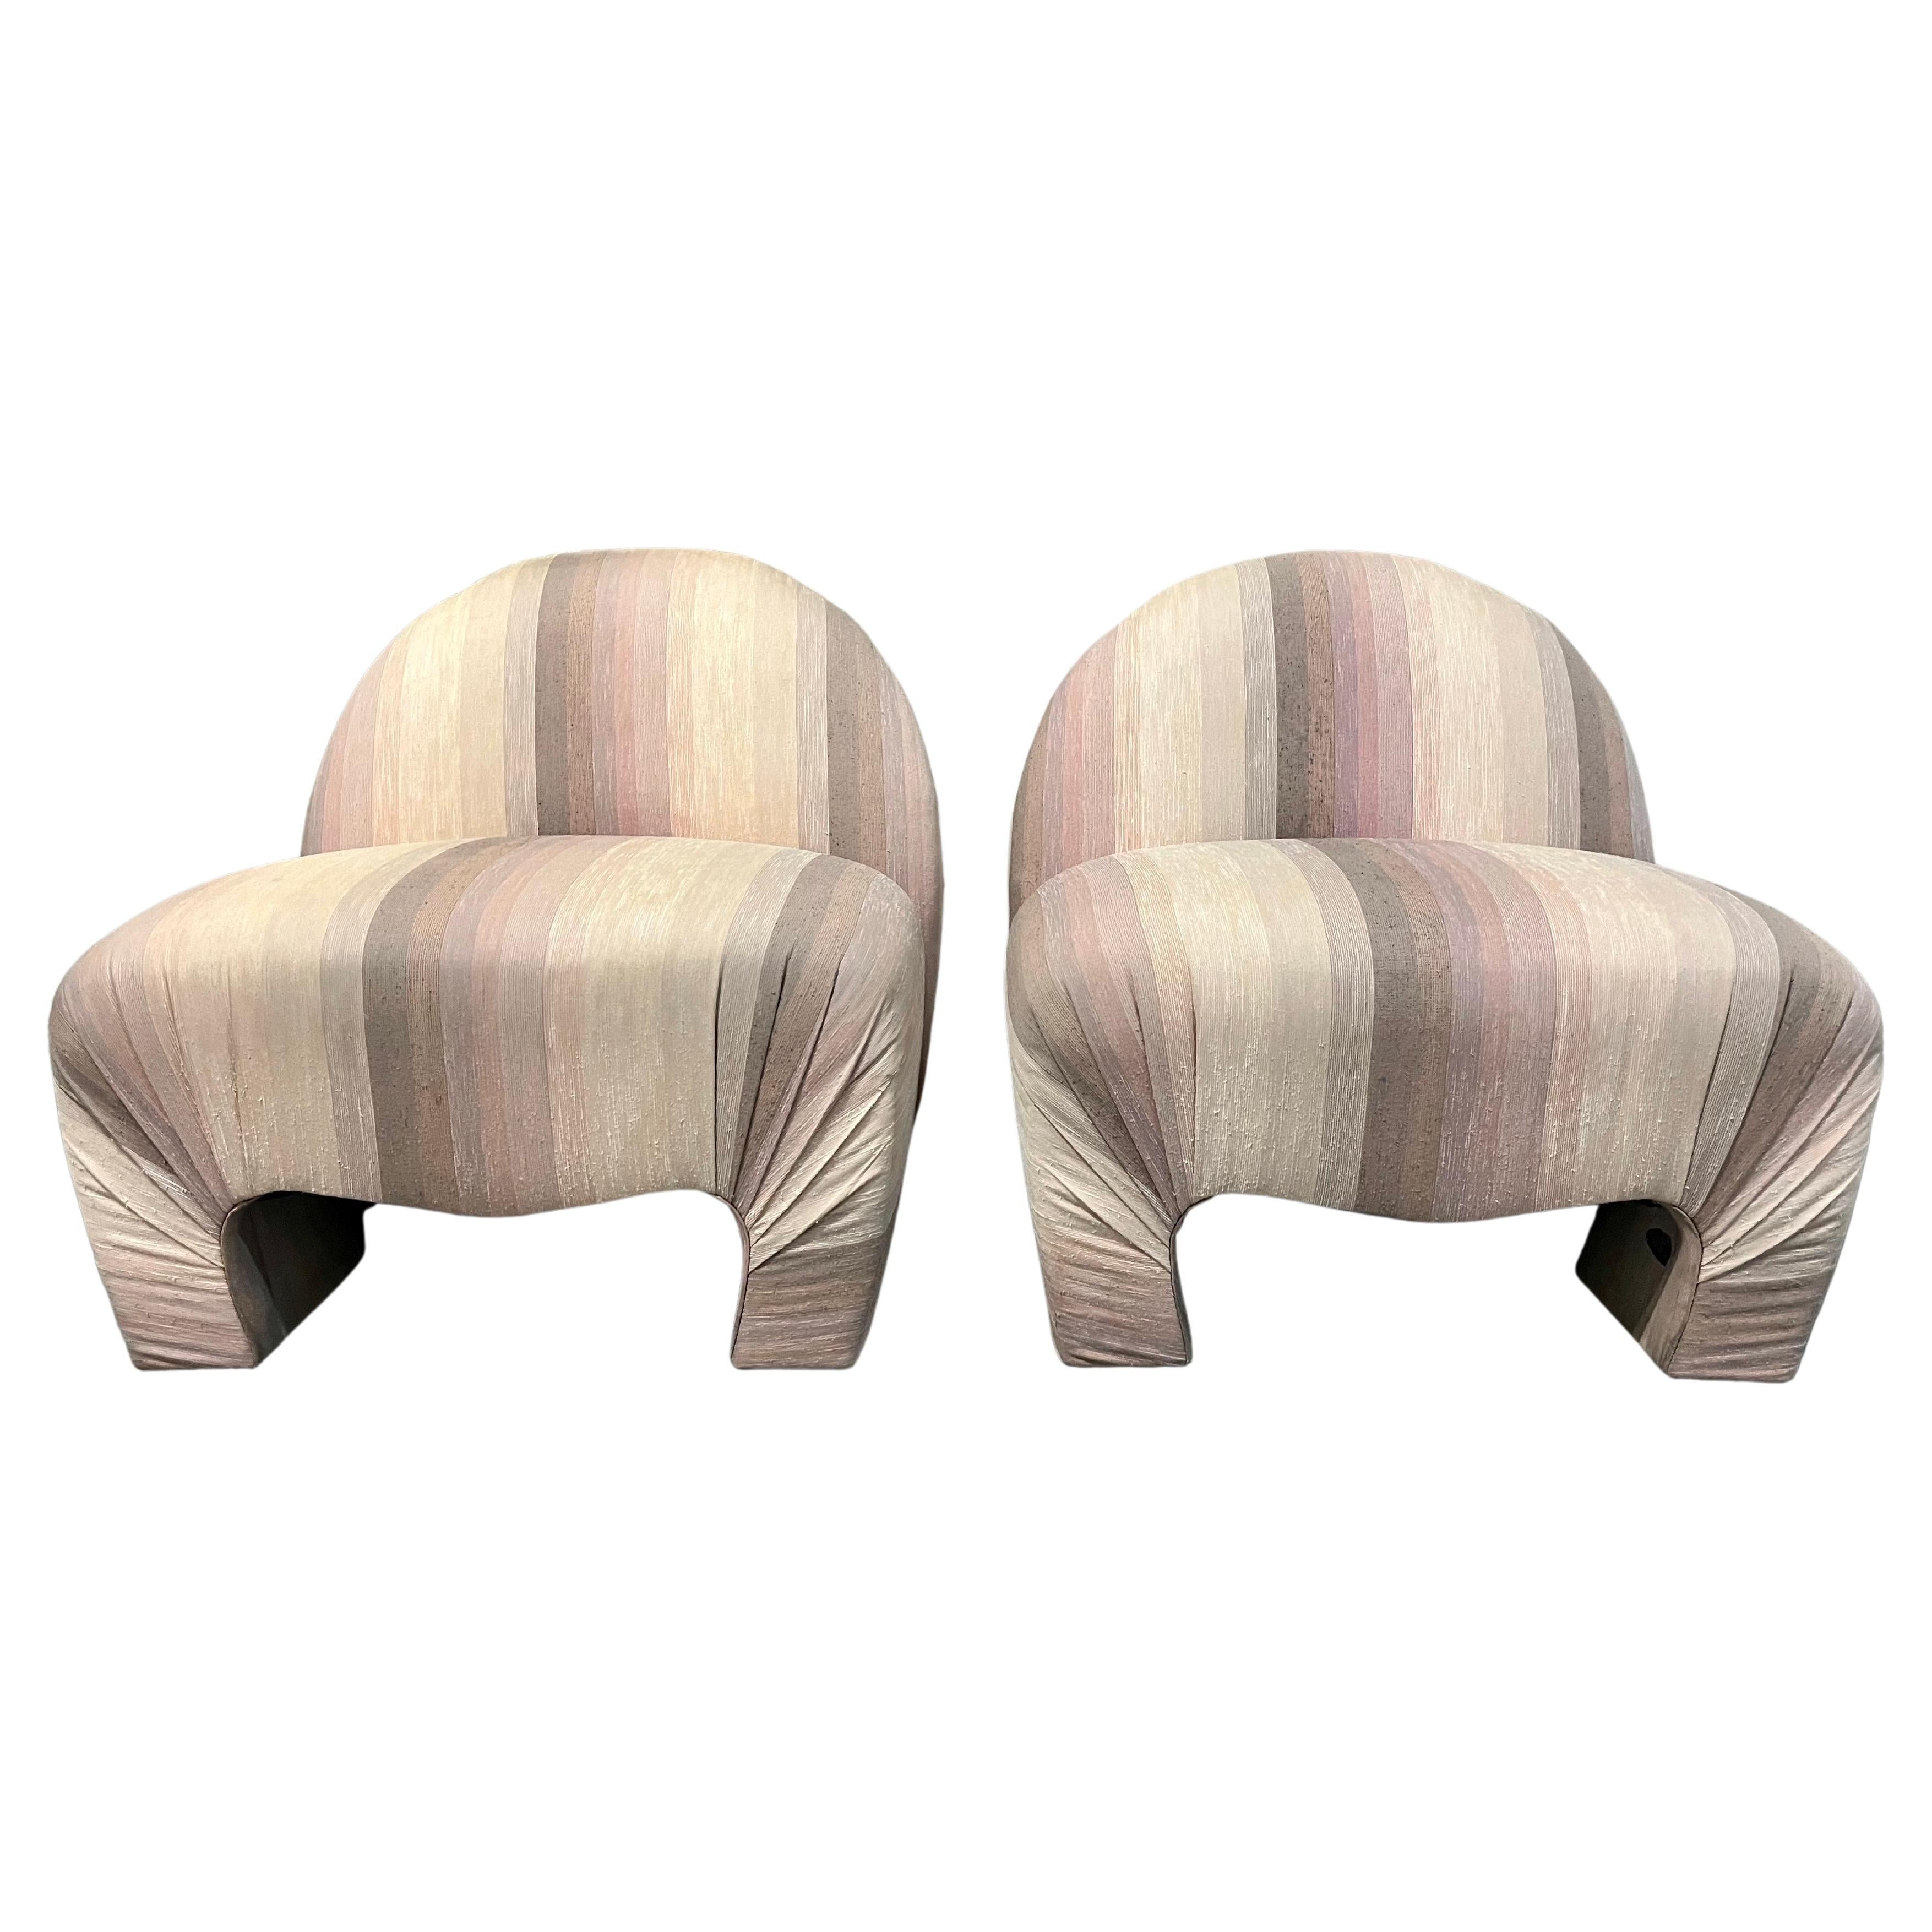 A Pair of Lounge Chairs in the Vladimir Kagan for Weiman Style. Circa 1980s For Sale